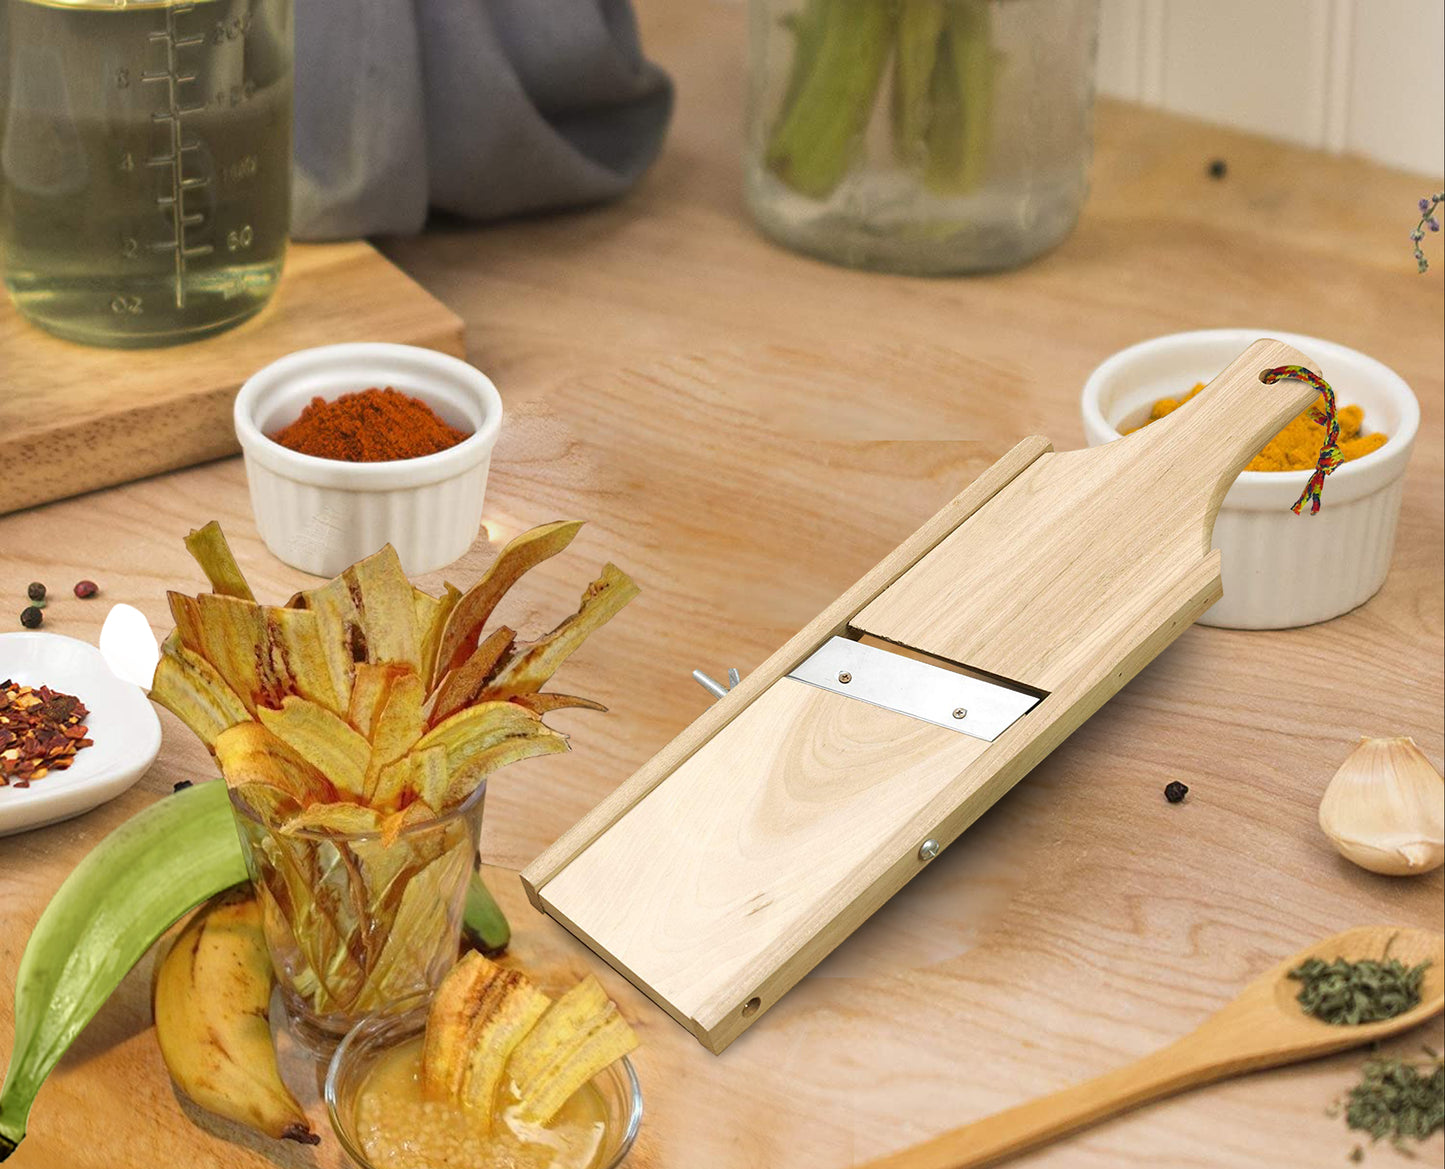 This Mandoline Makes Slicing Vegetables 'Fast and Easy'—and It's Over 50%  Off at